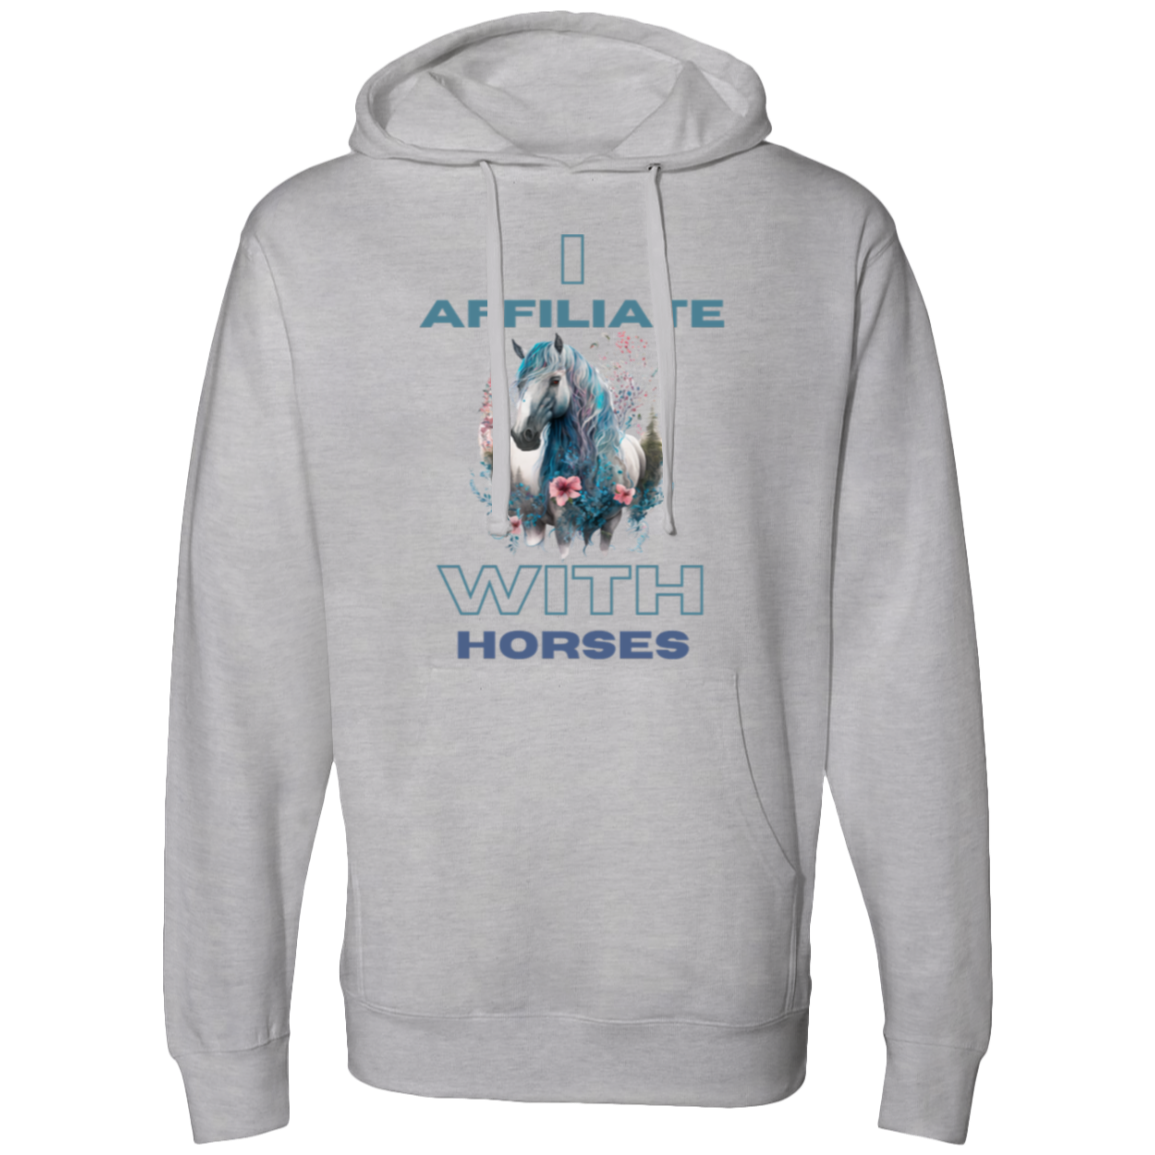 I Affiliate With Horses Hoodie